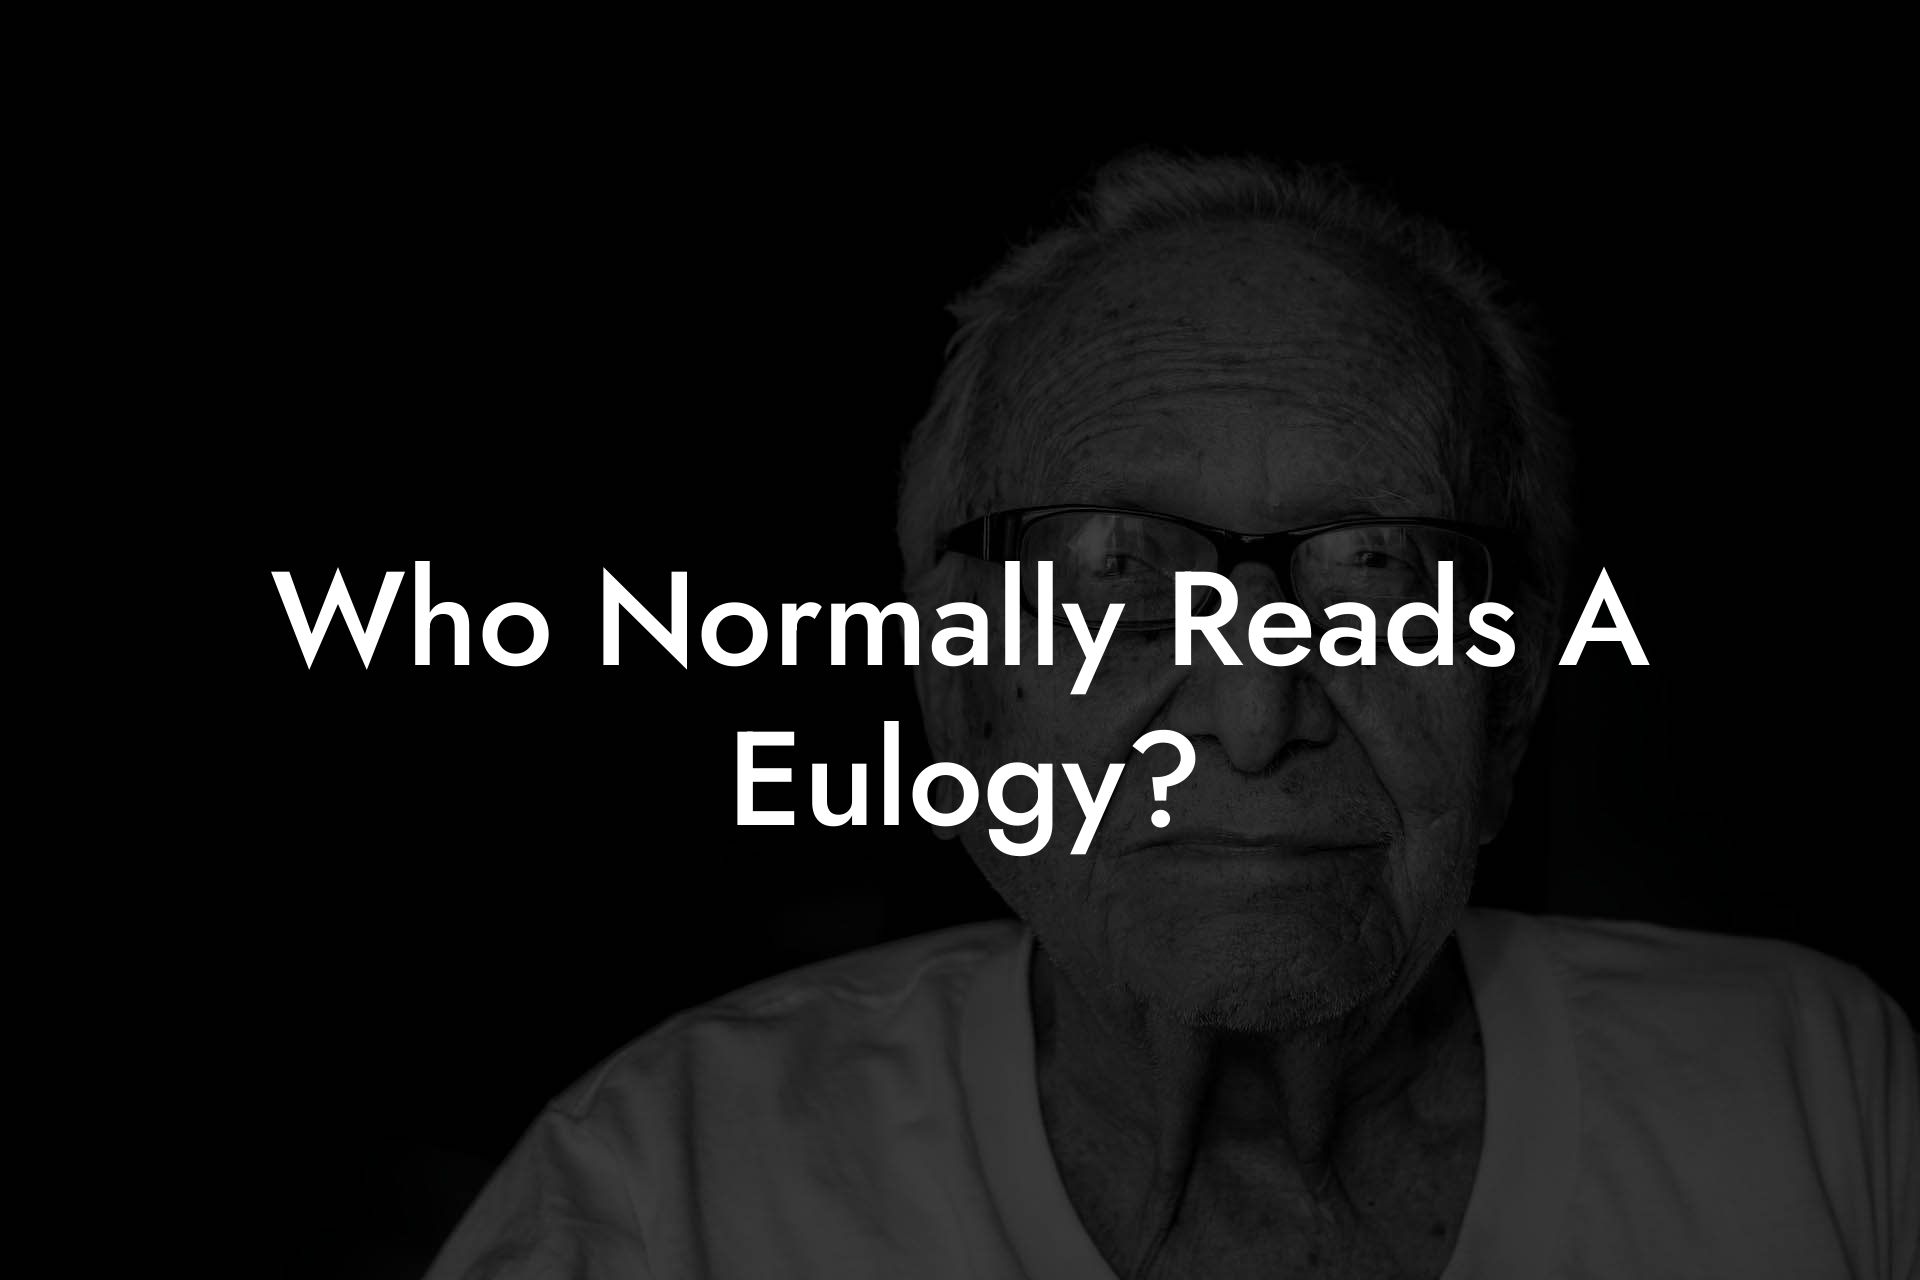 Who Normally Reads A Eulogy?